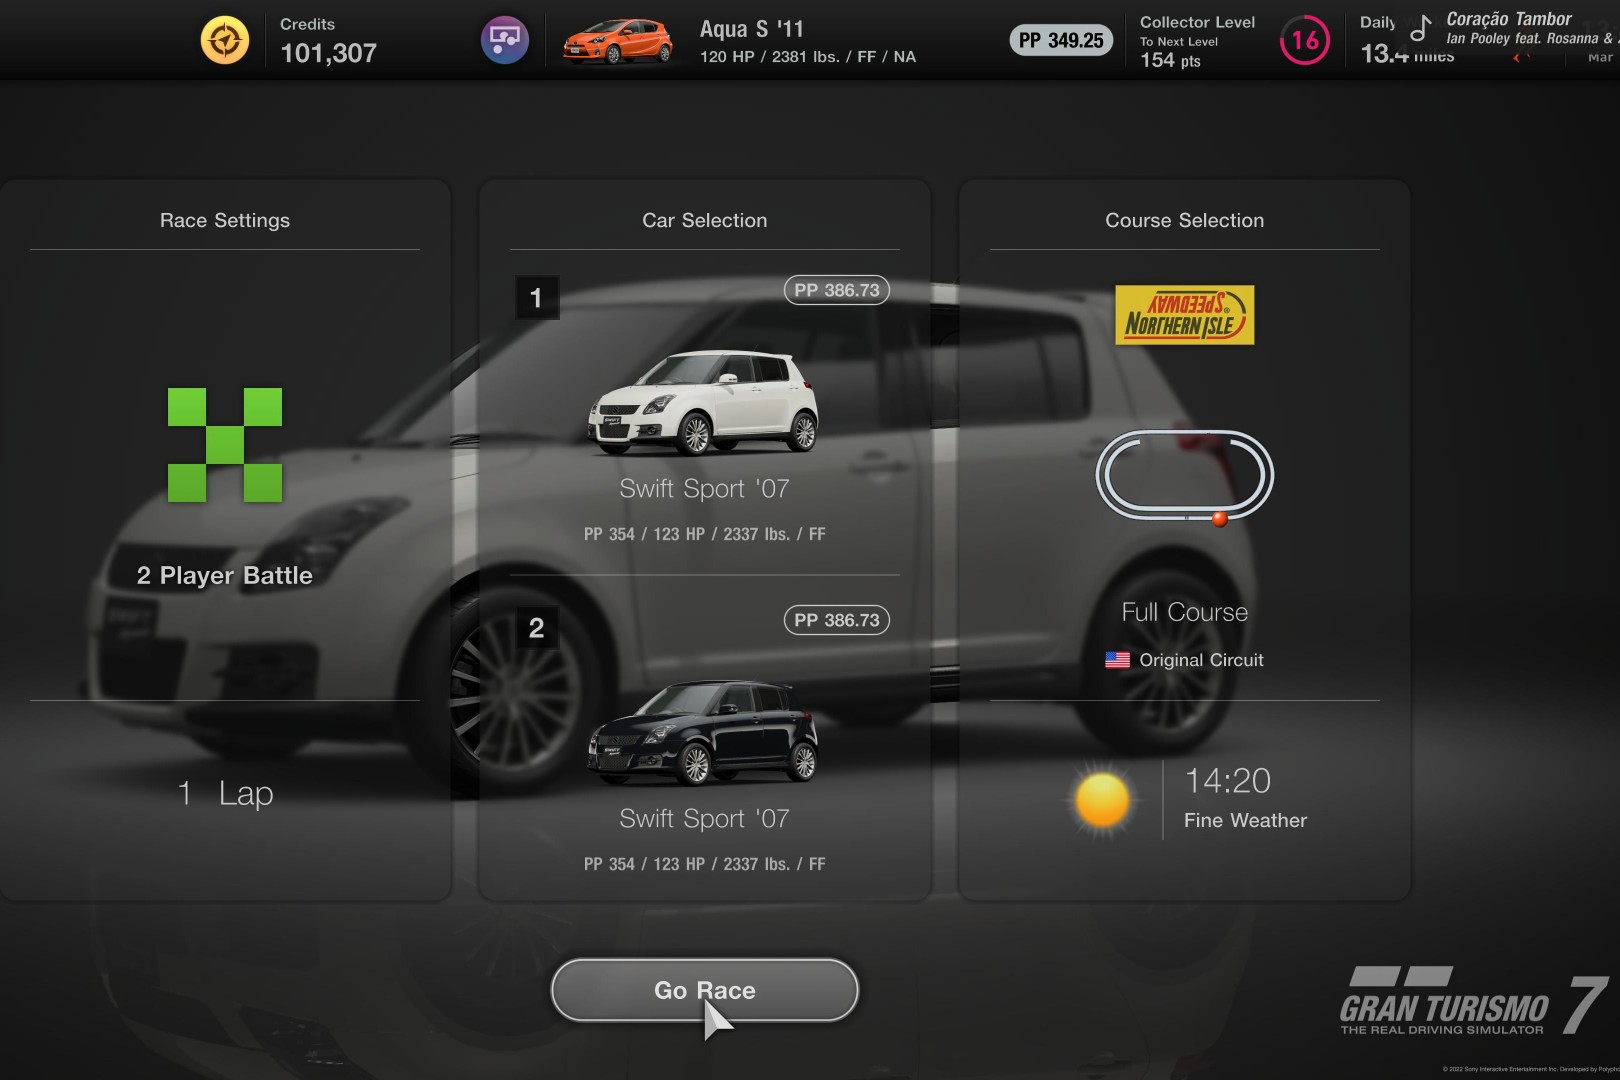 How to Unlock Local Multiplayer or Online Multiplayer in Gran Turismo 7